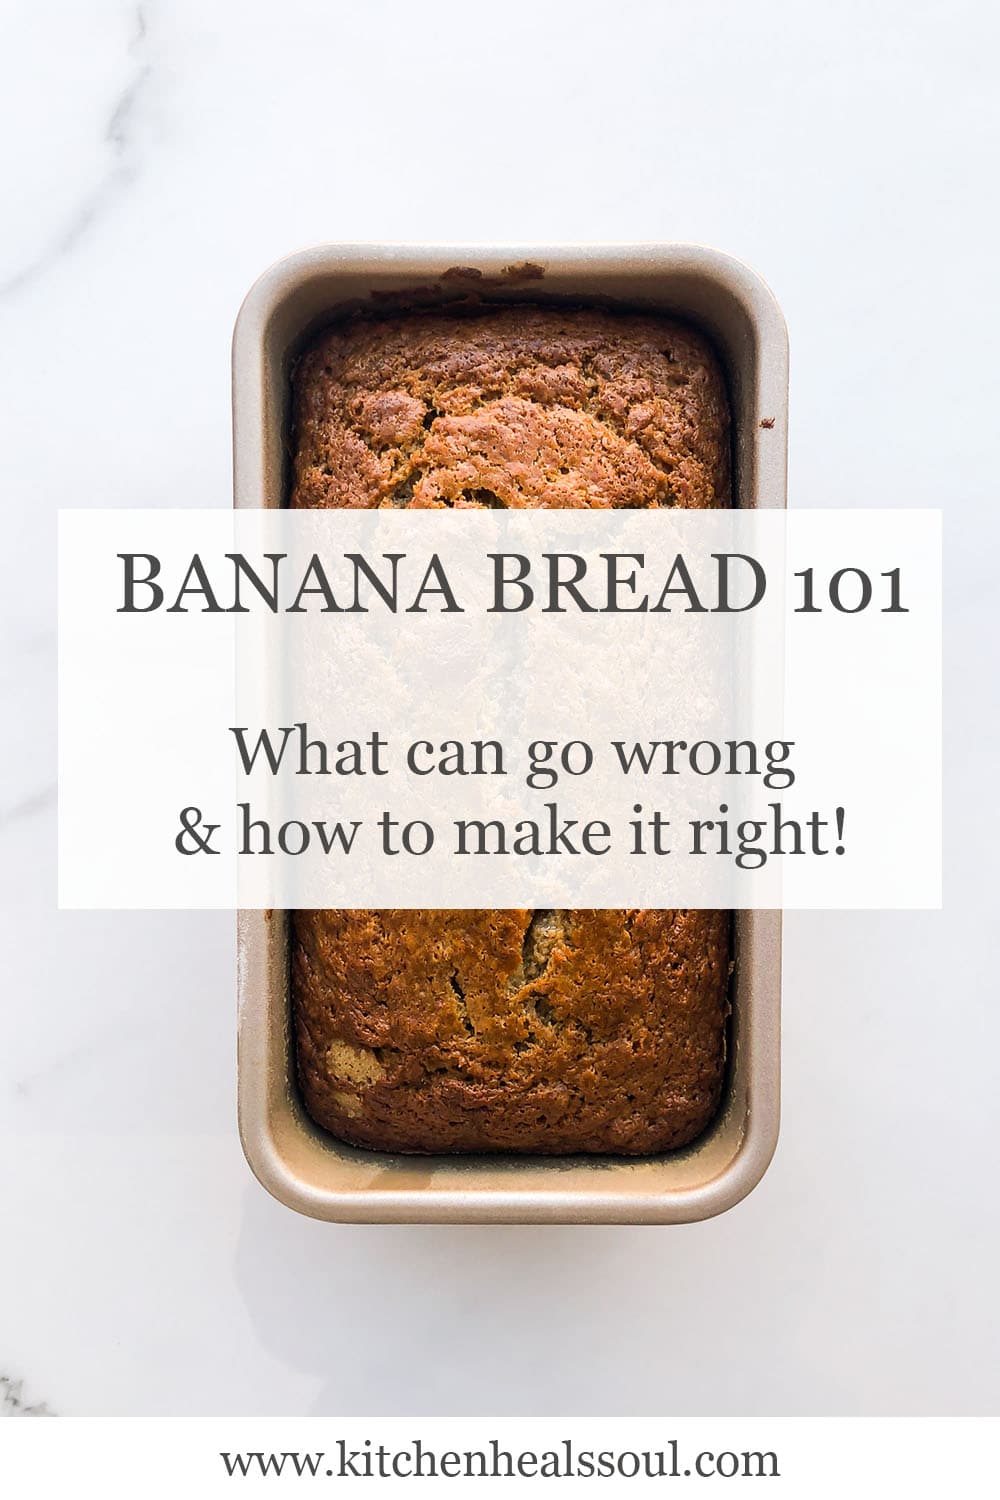 Banana bread 101: what can go wrong and how to make it right text overlaid on a freshly baked loaf of banana bread in a loaf pan